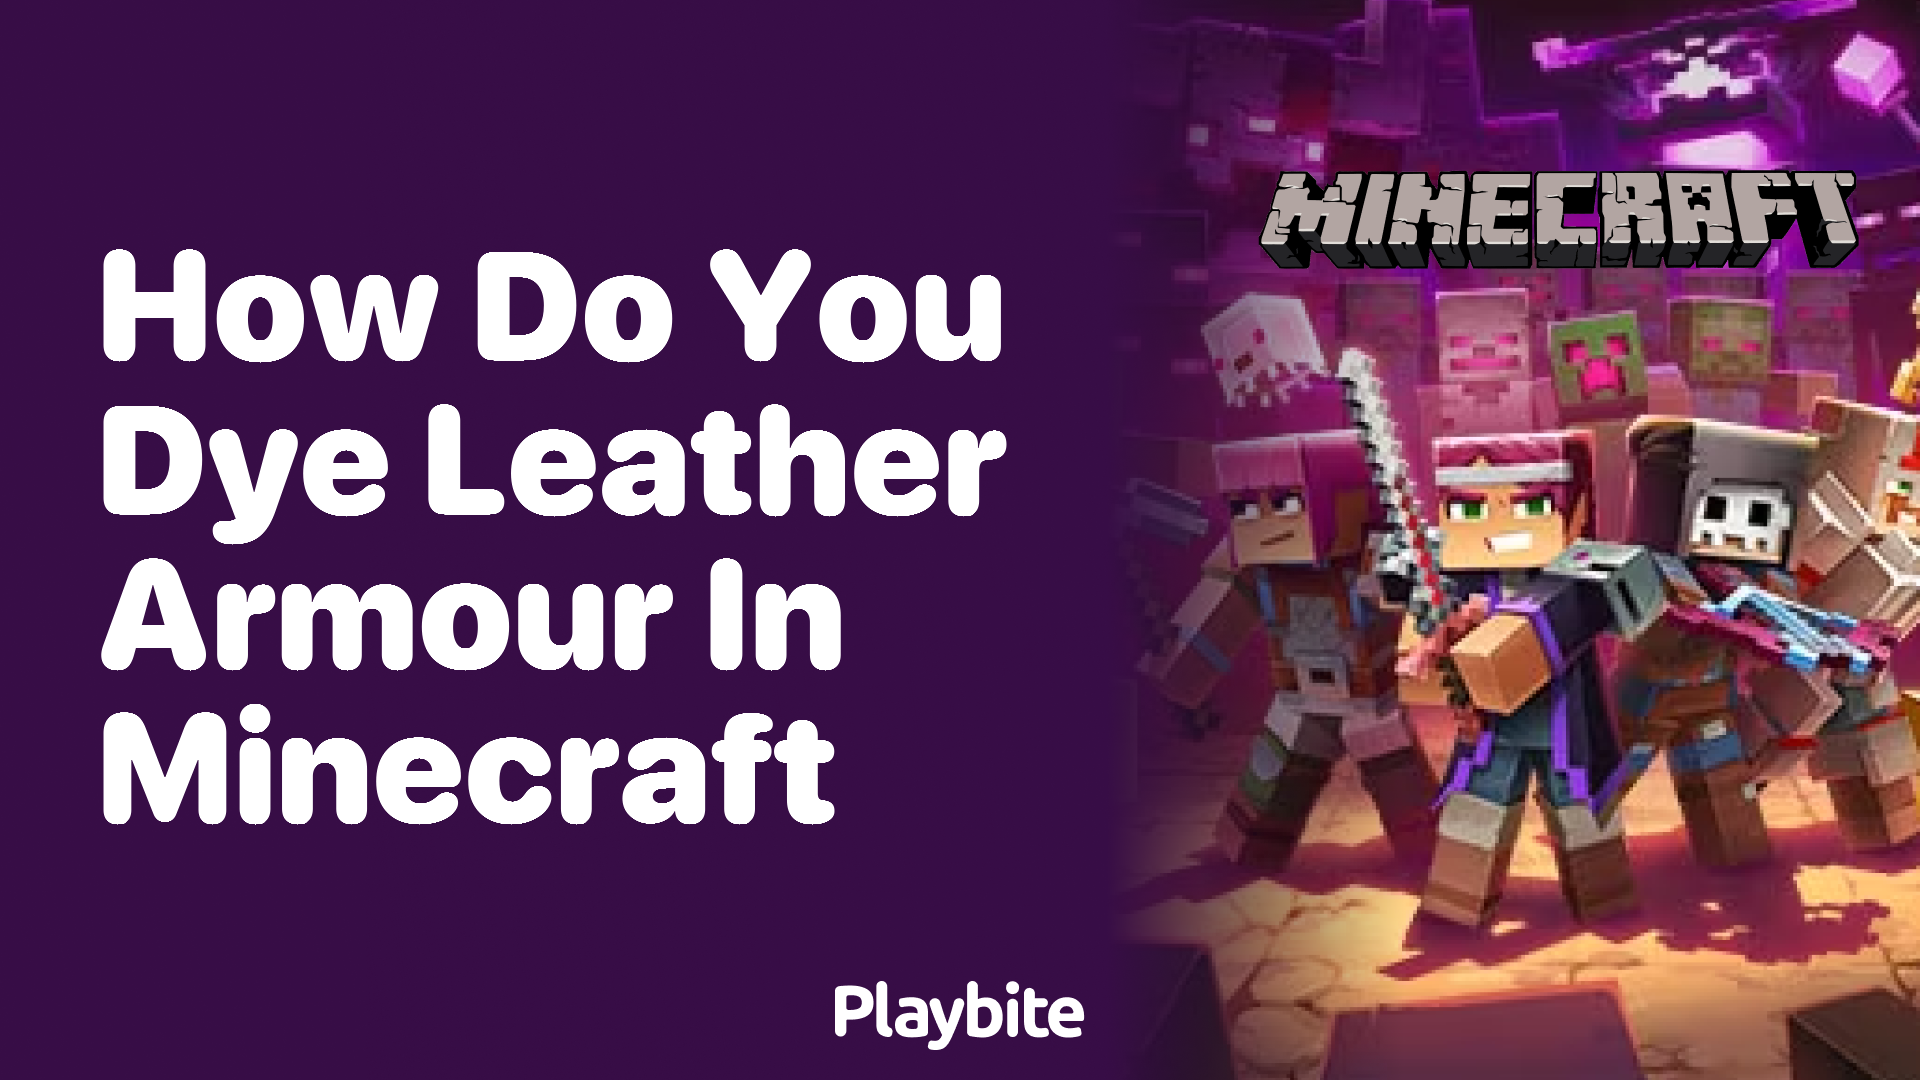 How Do You Dye Leather Armor in Minecraft? - Playbite